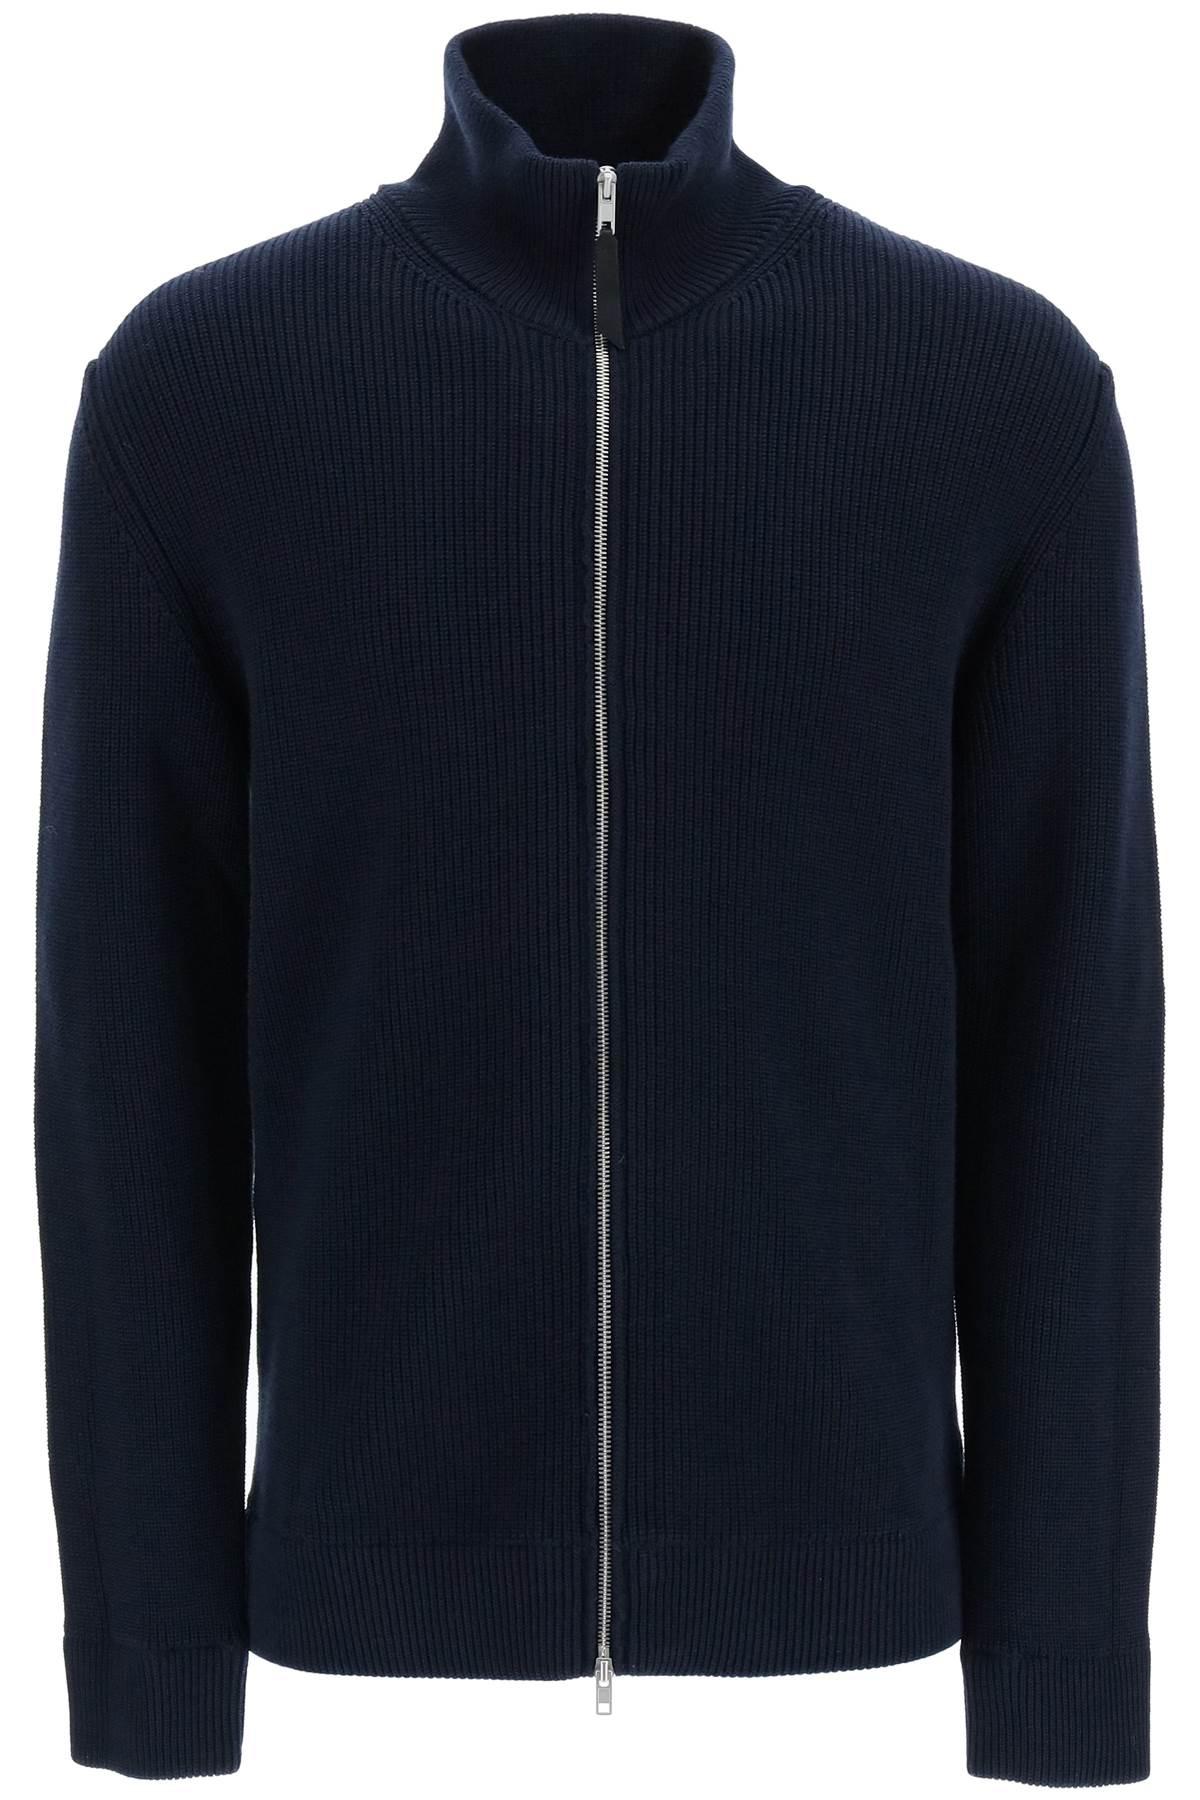 MAISON MARGIELA FULL ZIP CARDIGAN IN WOOL AND COTTON